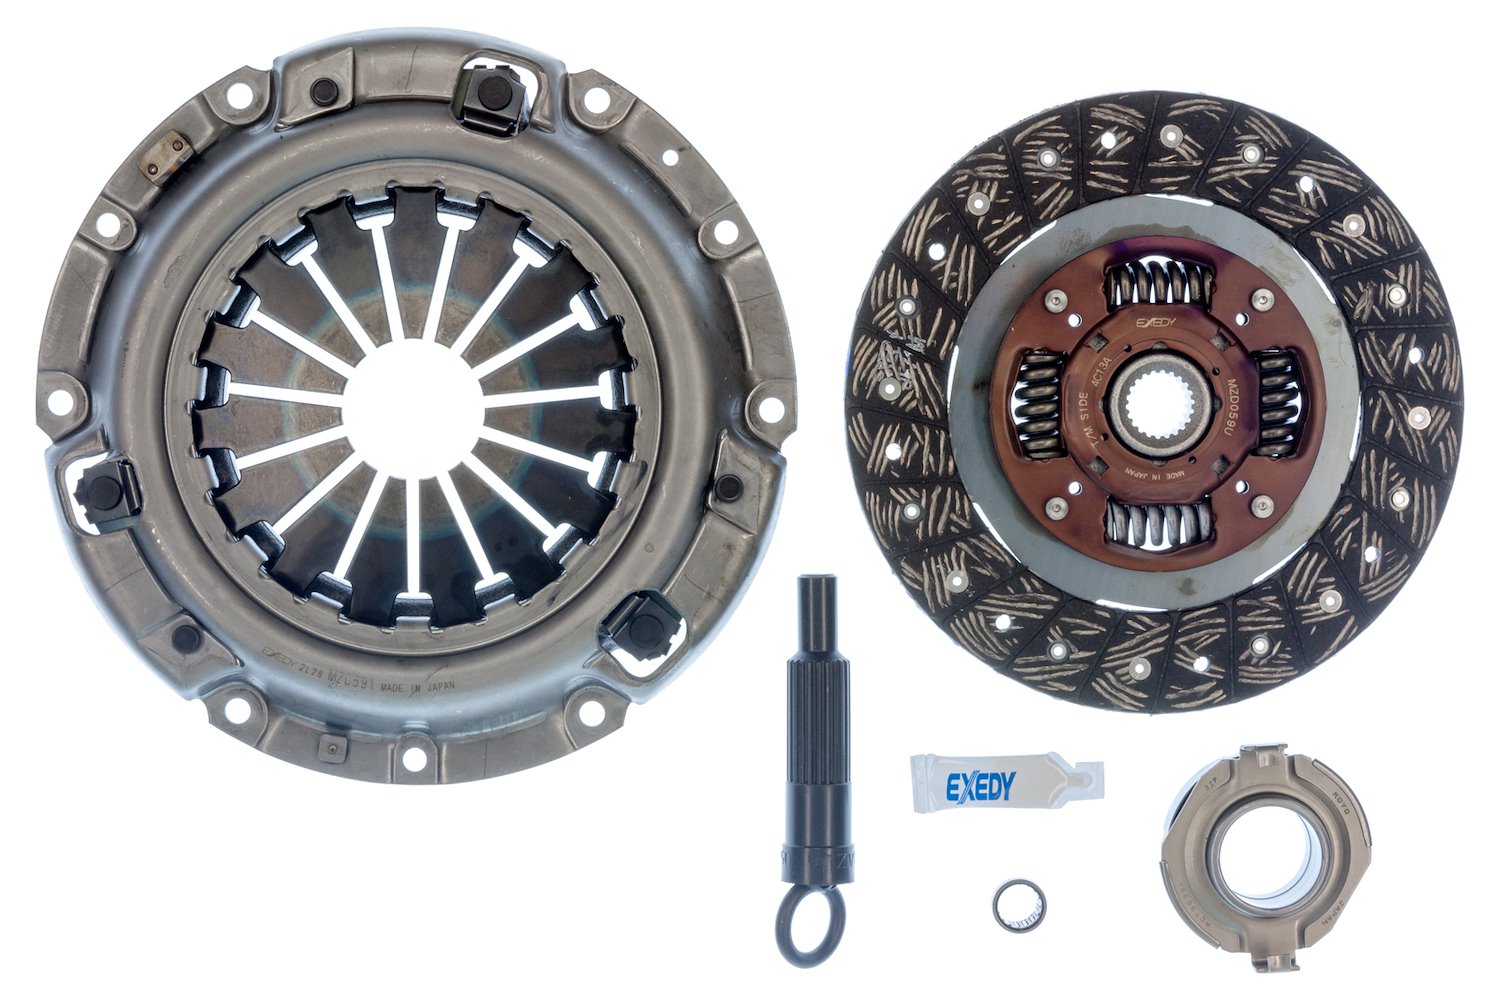 10038 OEM Replacement Transmission Clutch Kit, 1989-1991 Mazda RX-7 R2